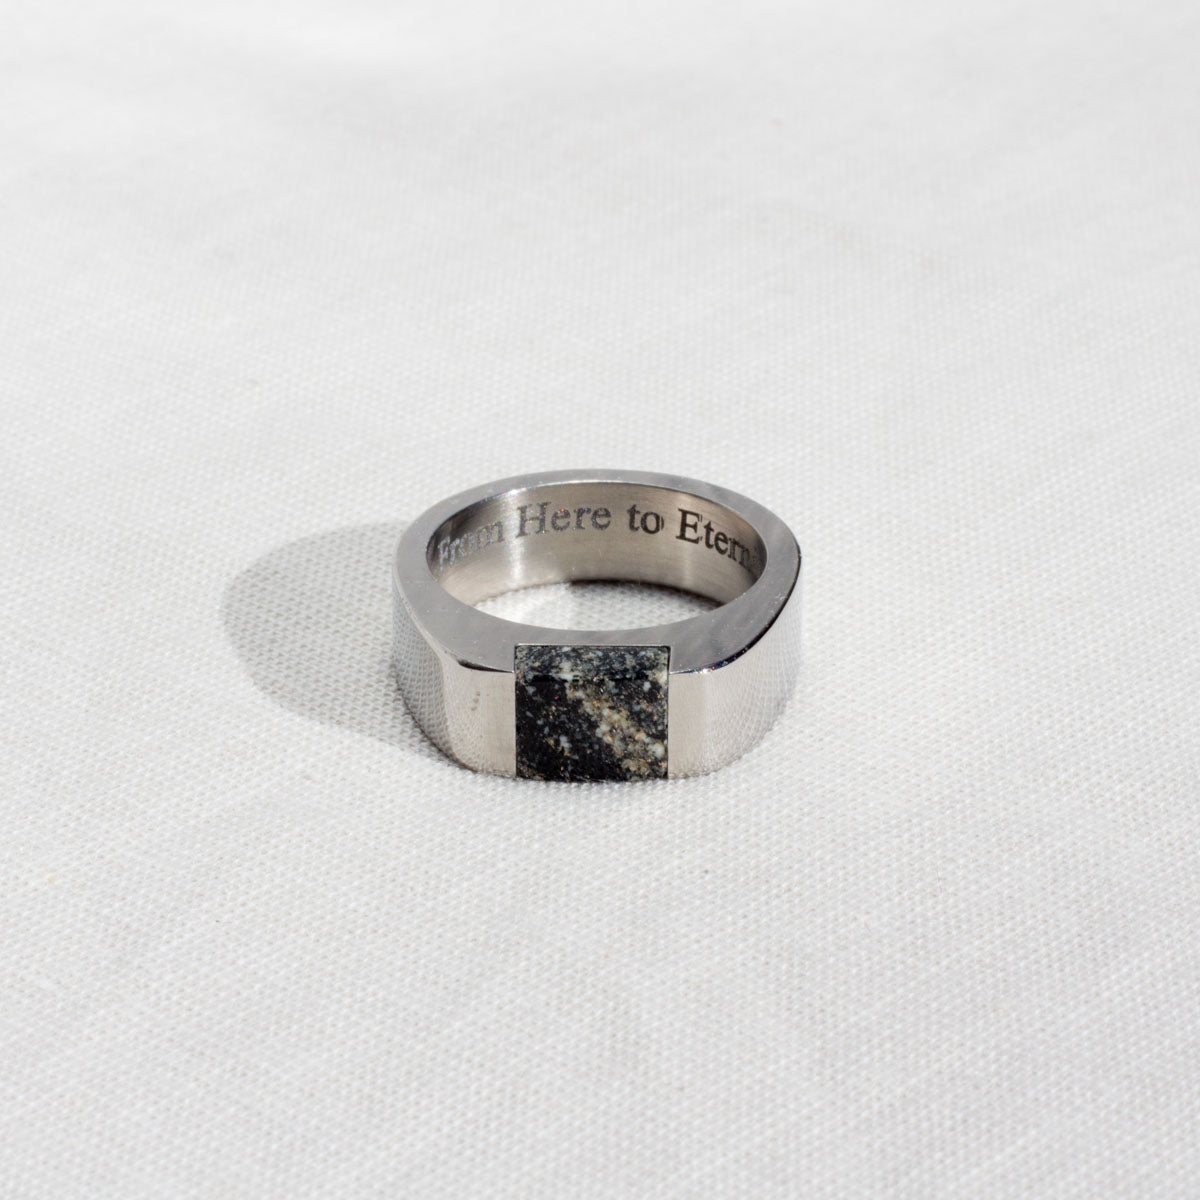 Silver color stainless ring with text engraved inside